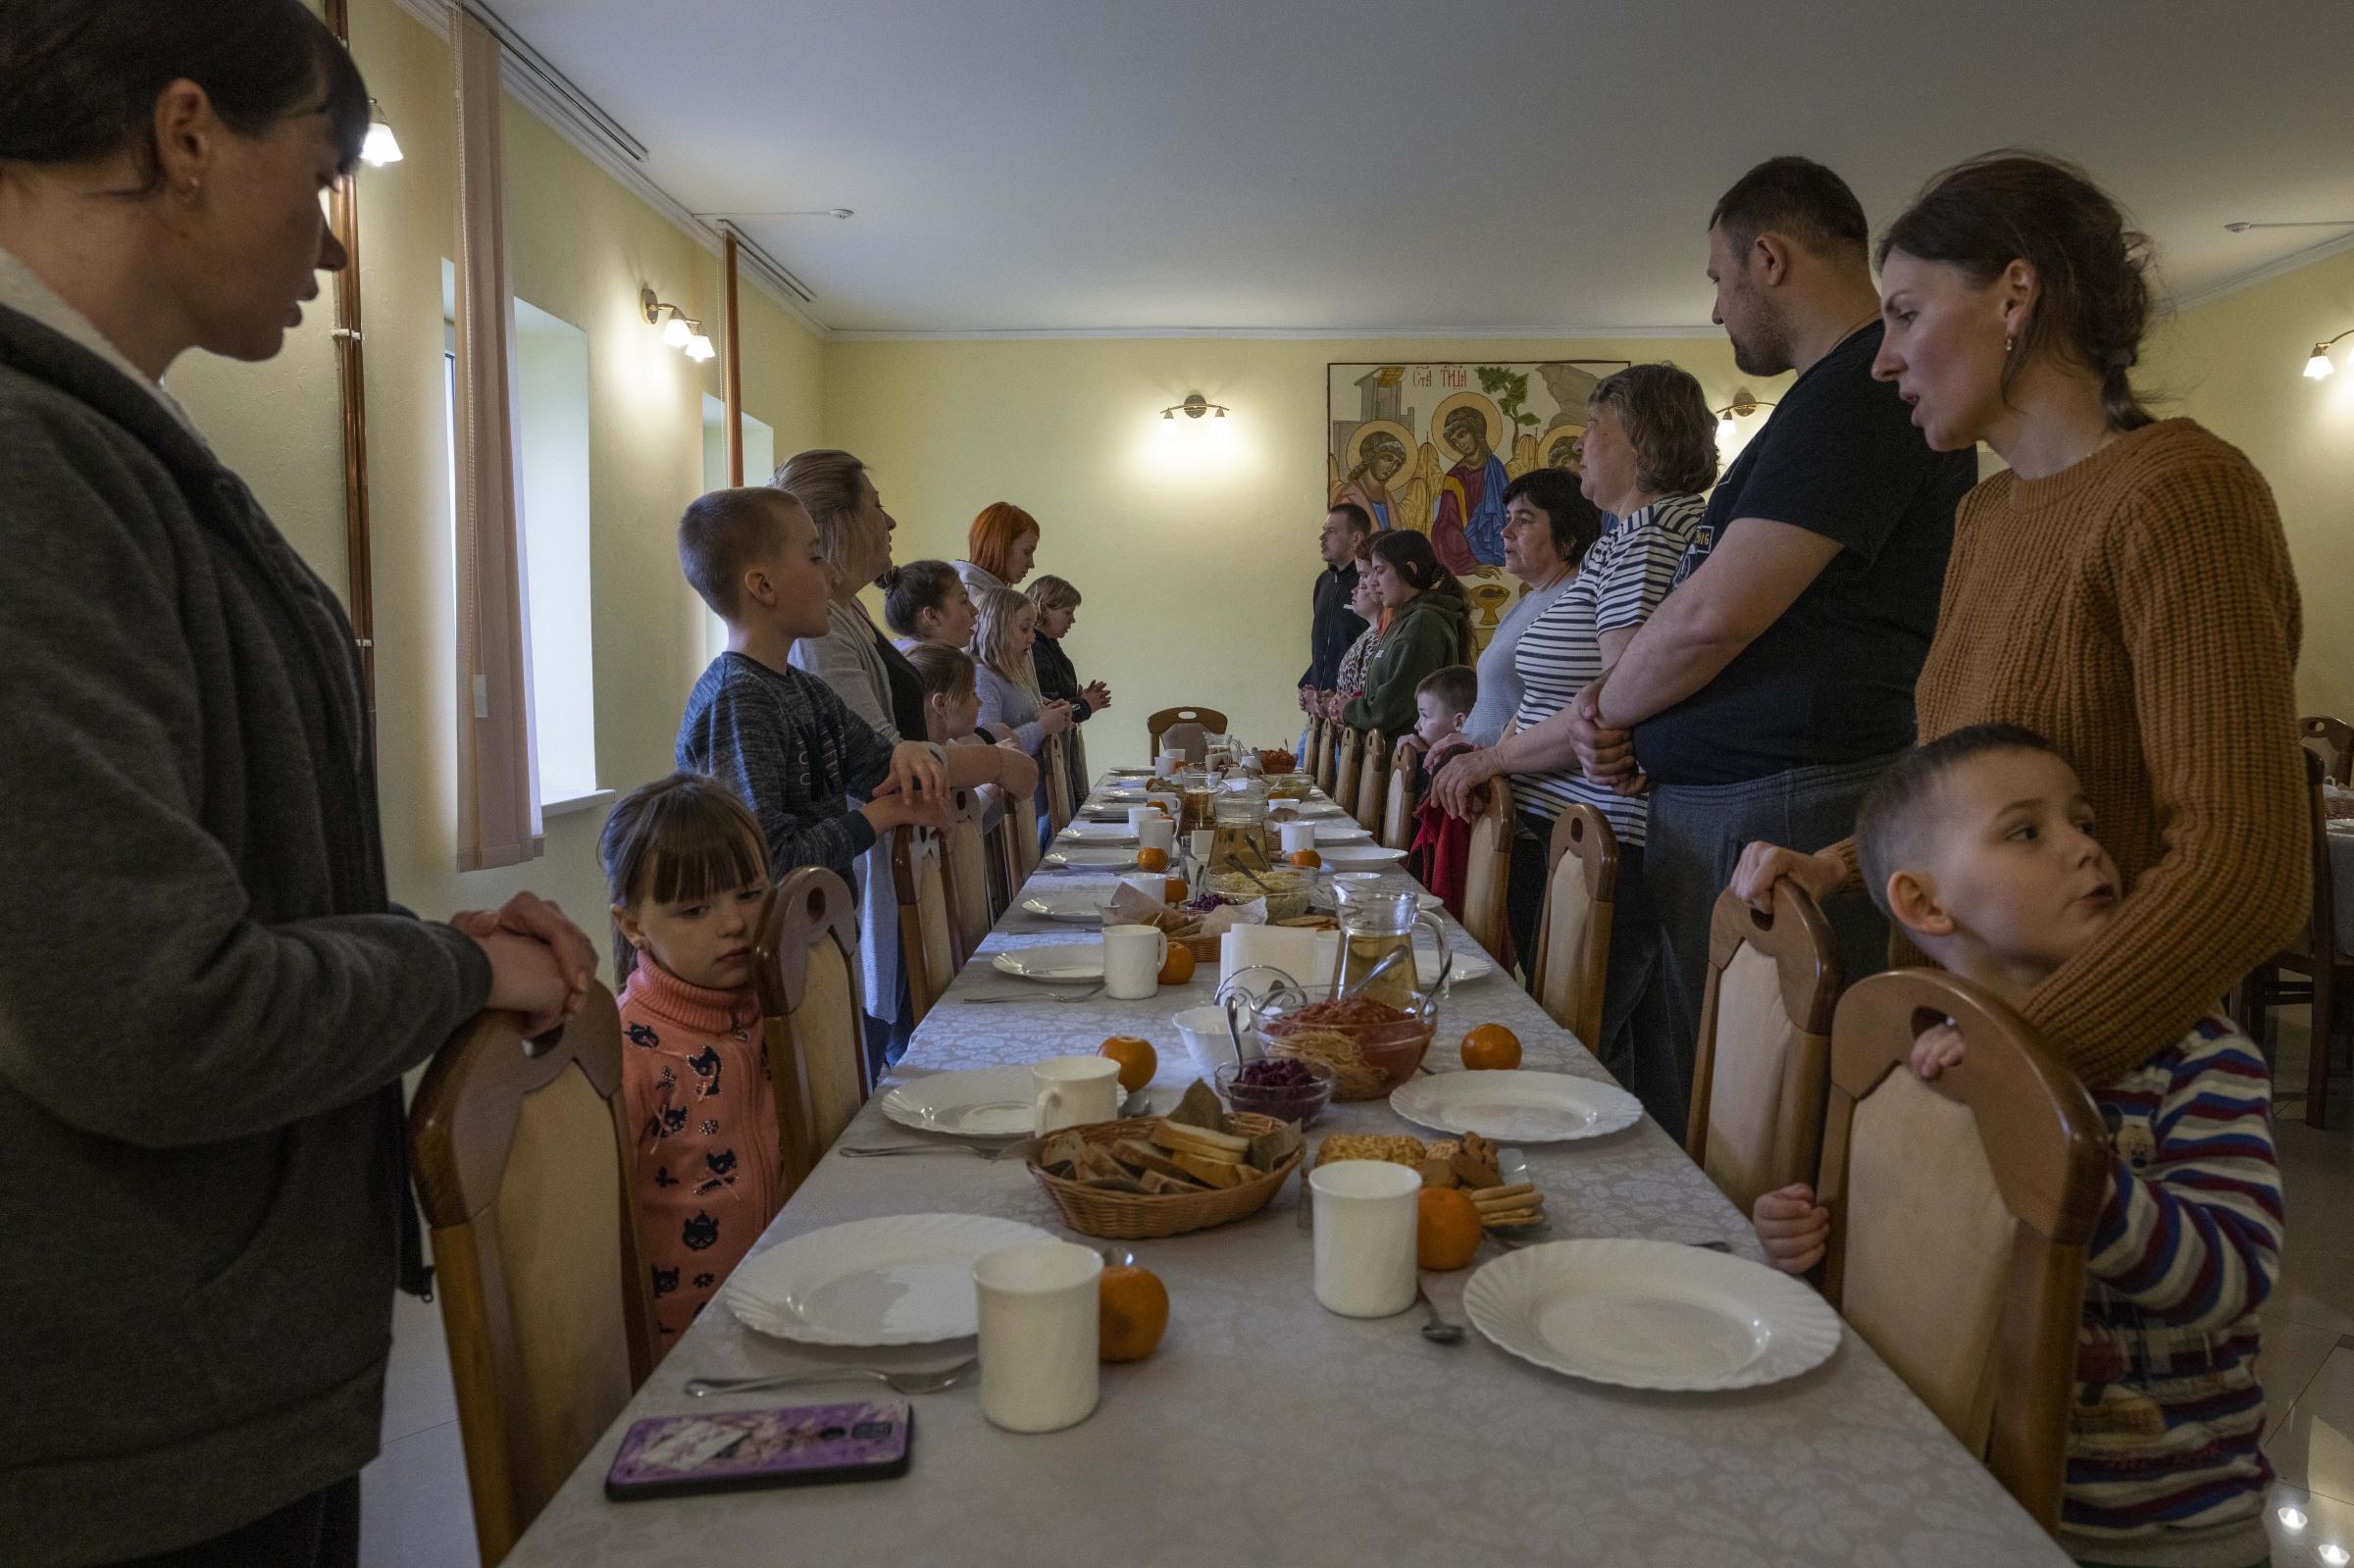 Ukraine's nuns open monastery doors to the displaced - Internally displaced families make prayers before dinner.